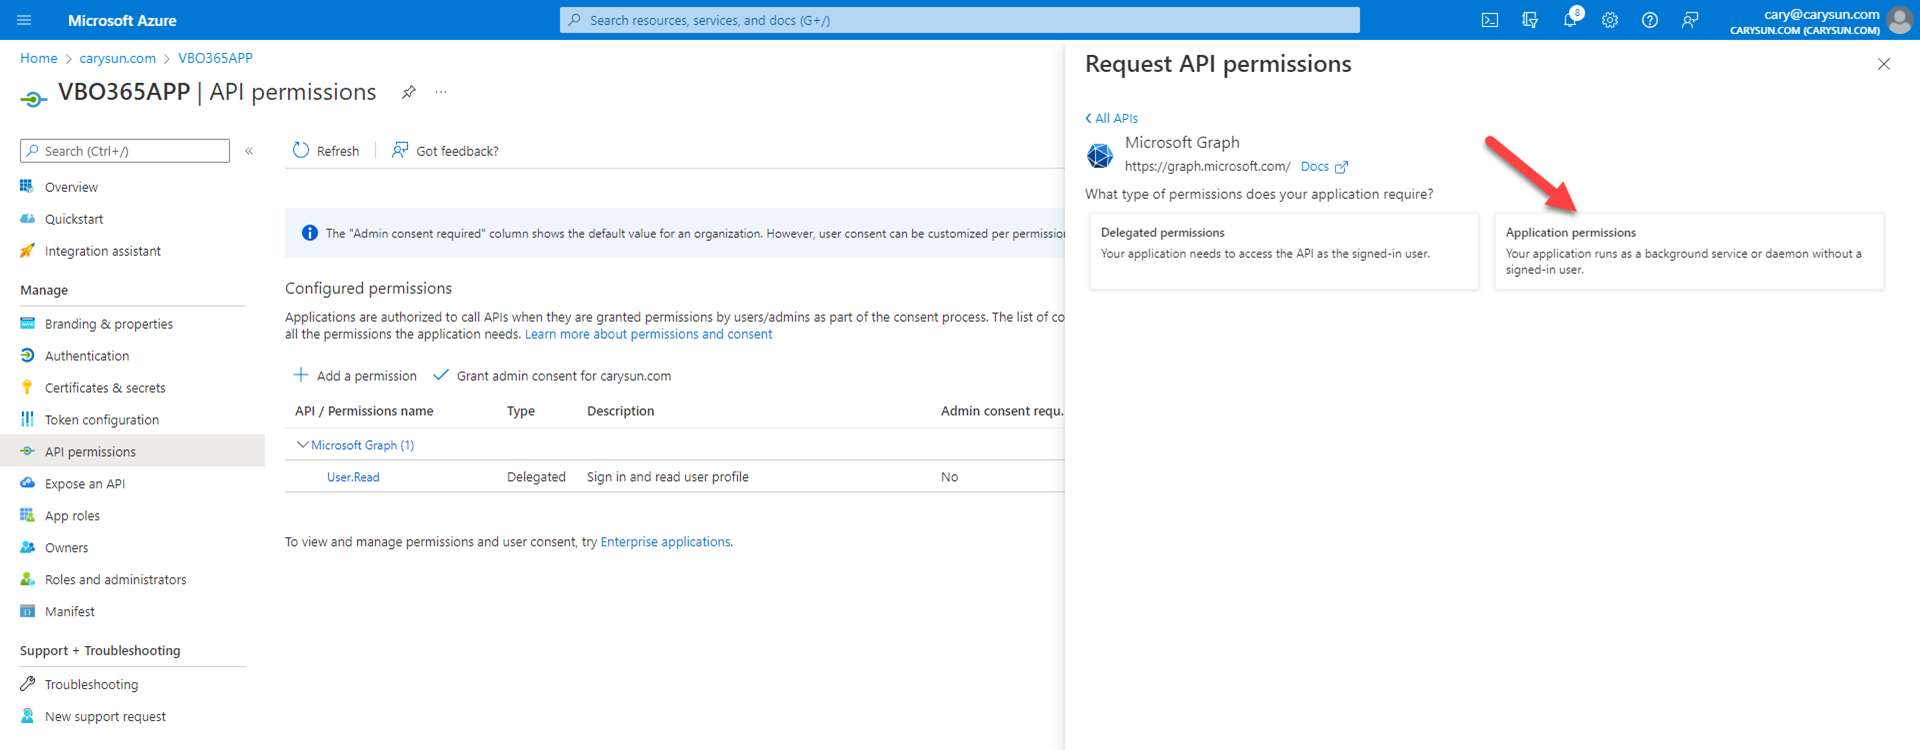 042222 1711 Howtoconfig9 - How to configure Azure AD Application Permissions for Modern Authentication and Legacy Protocols Authentication of Veeam Backup for Microsoft 365